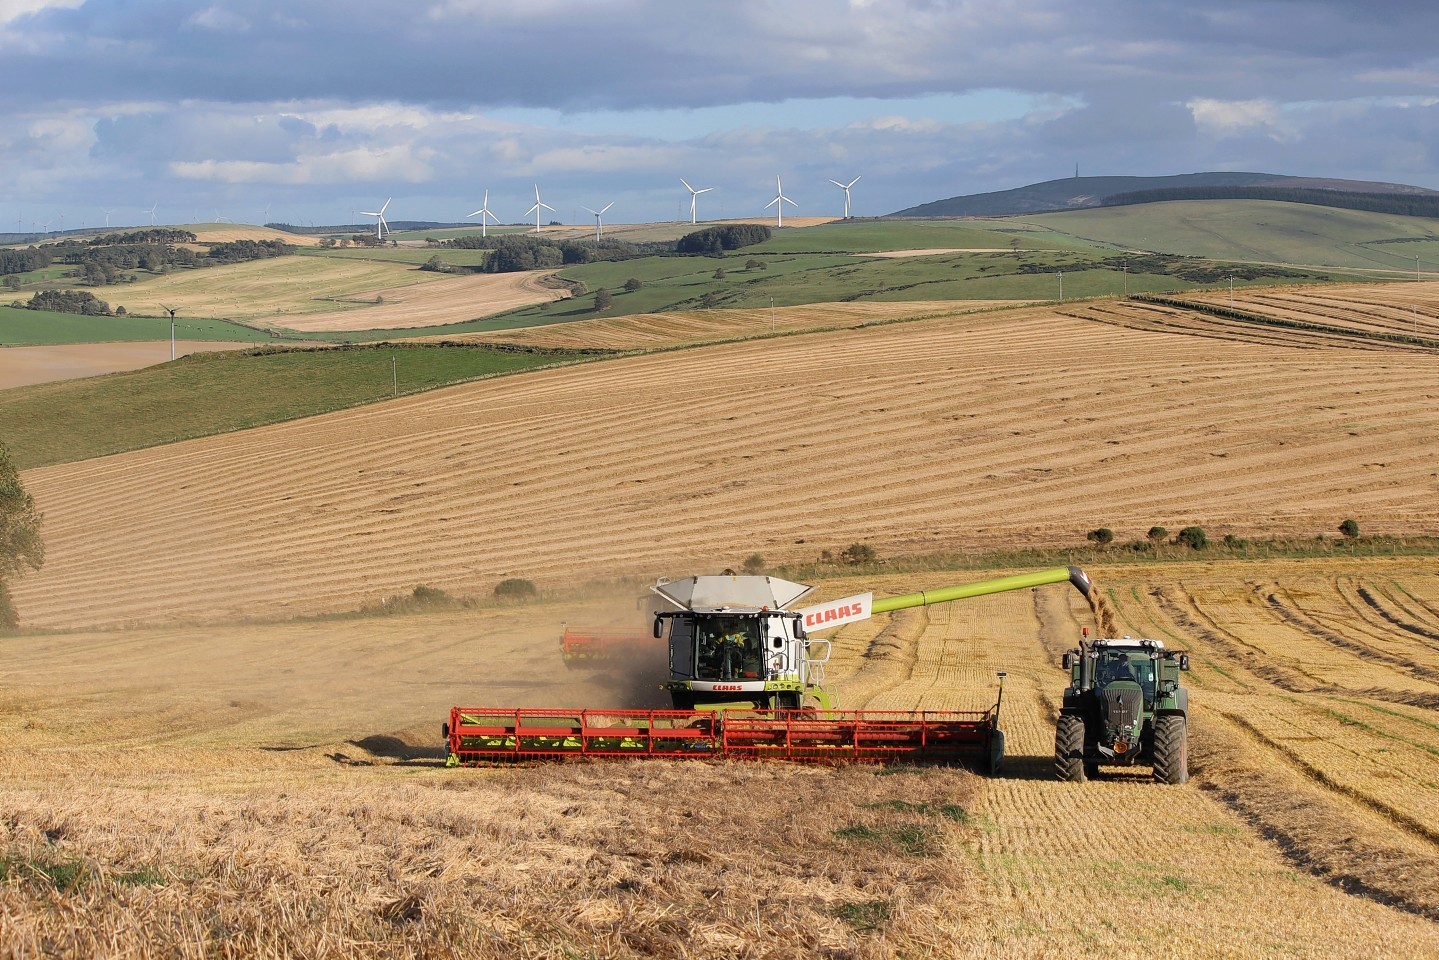 The company is Britain’s largest arable inputs and marketing firm.